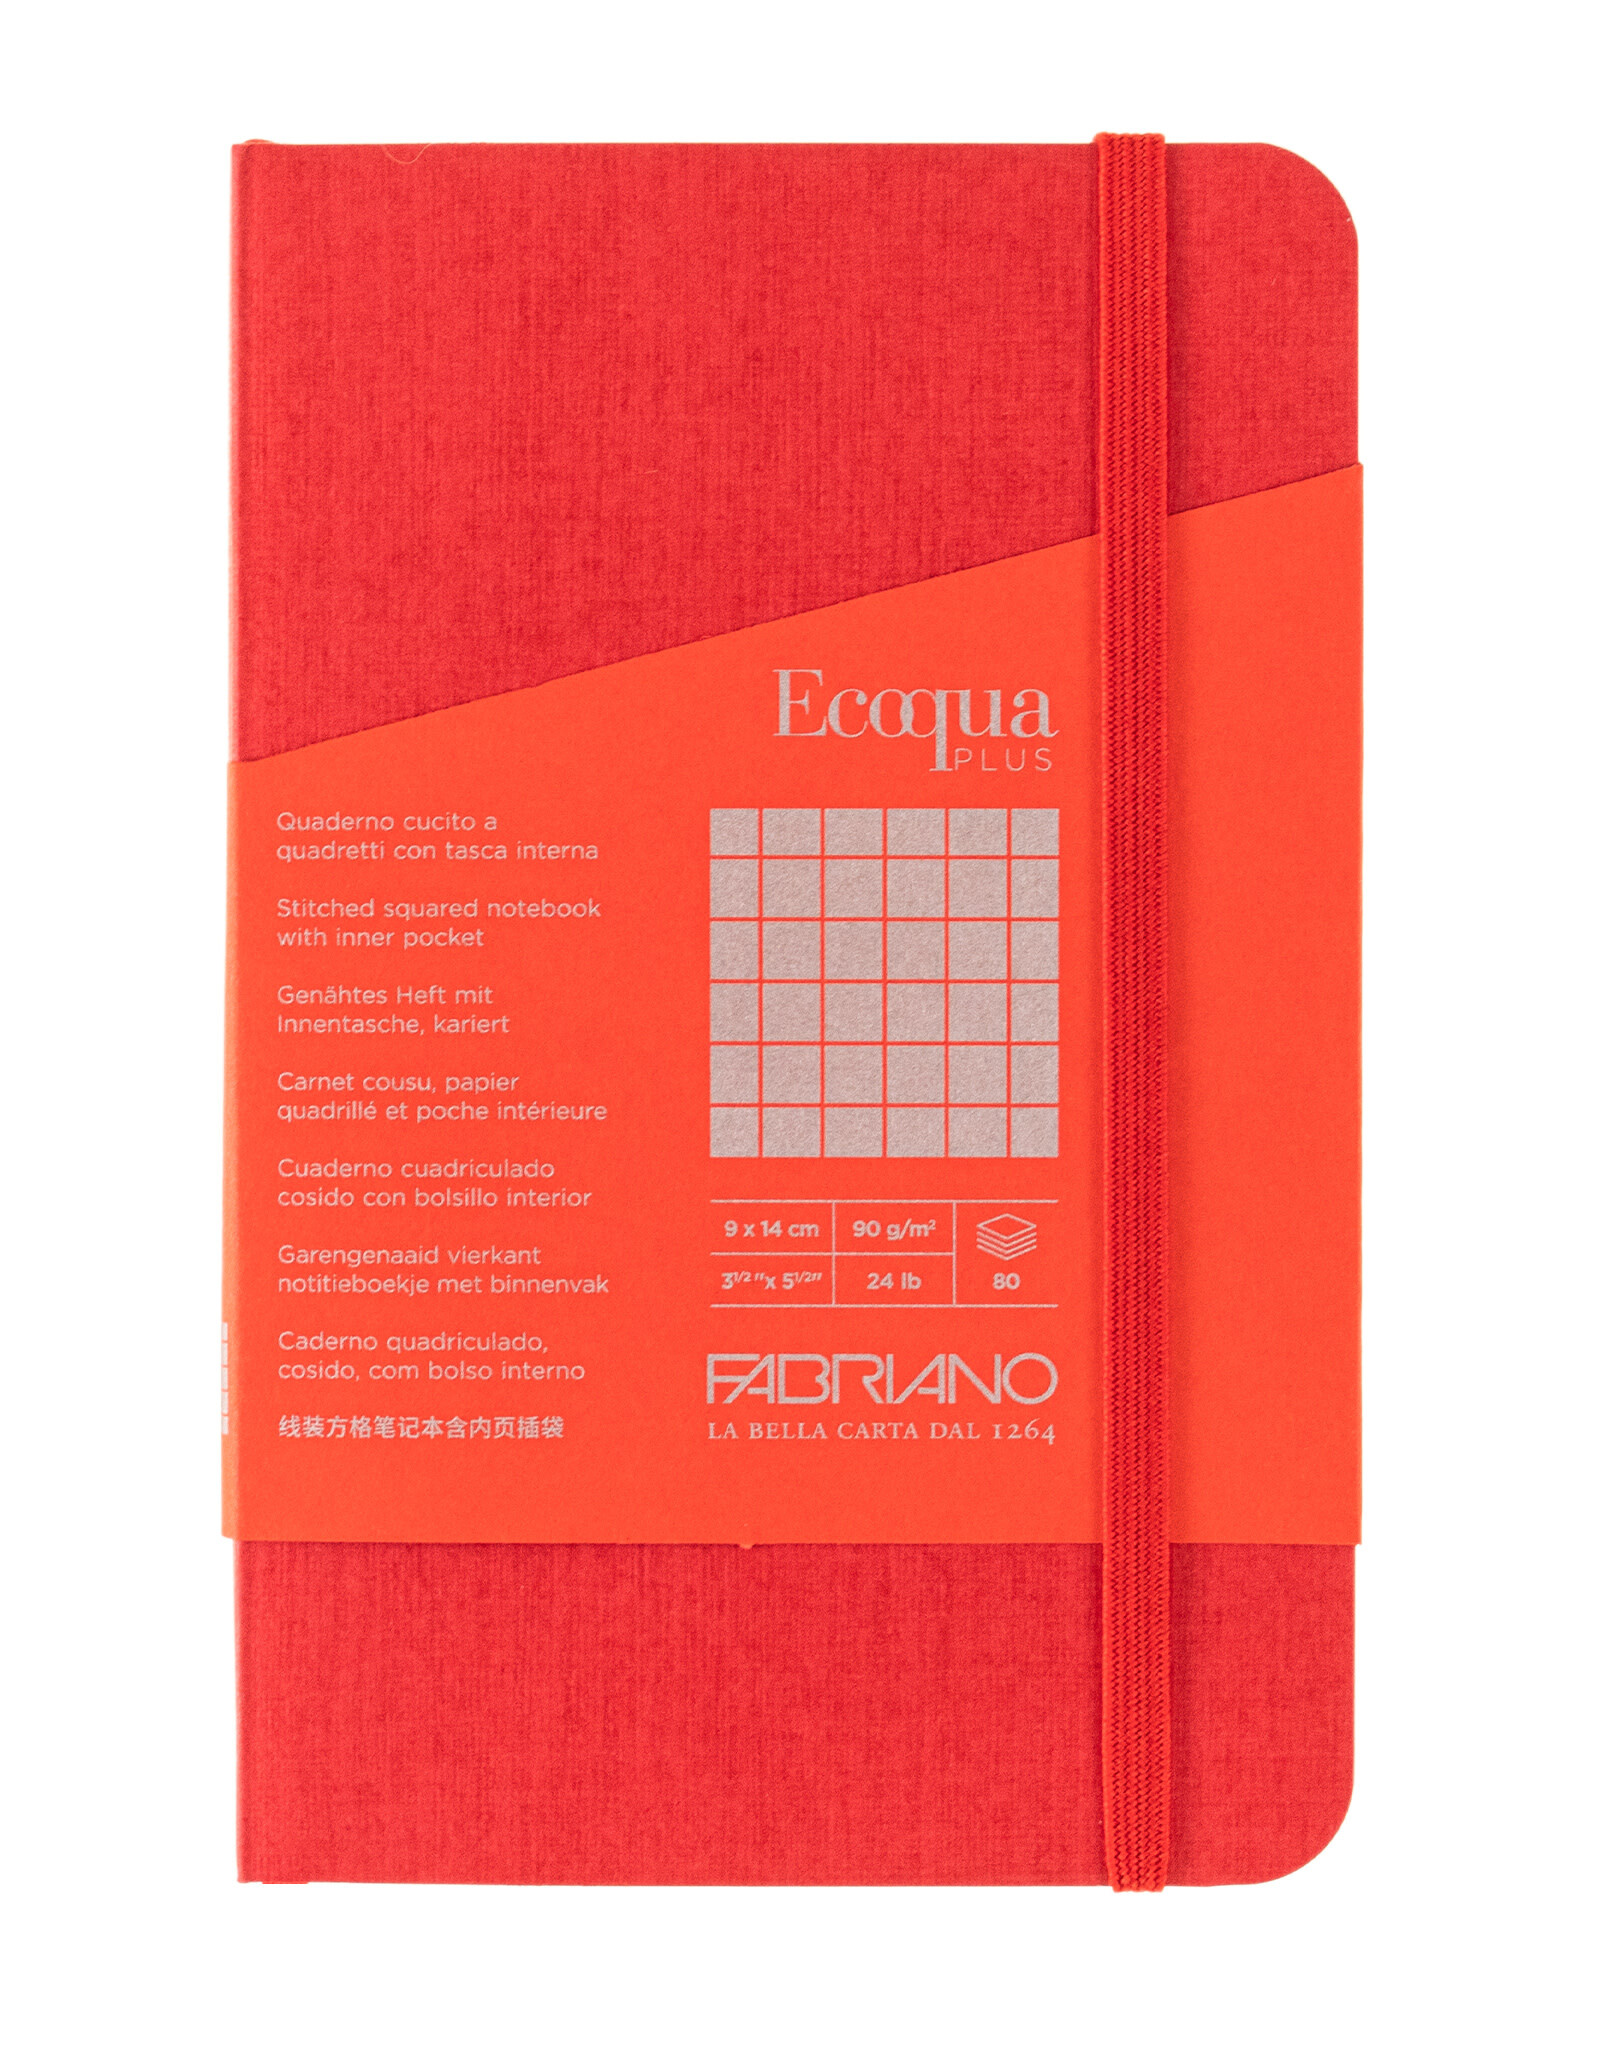 Ecoqua Plus Sewn Spine Notebook, Red, 3.5” x 5.5”, Graphed